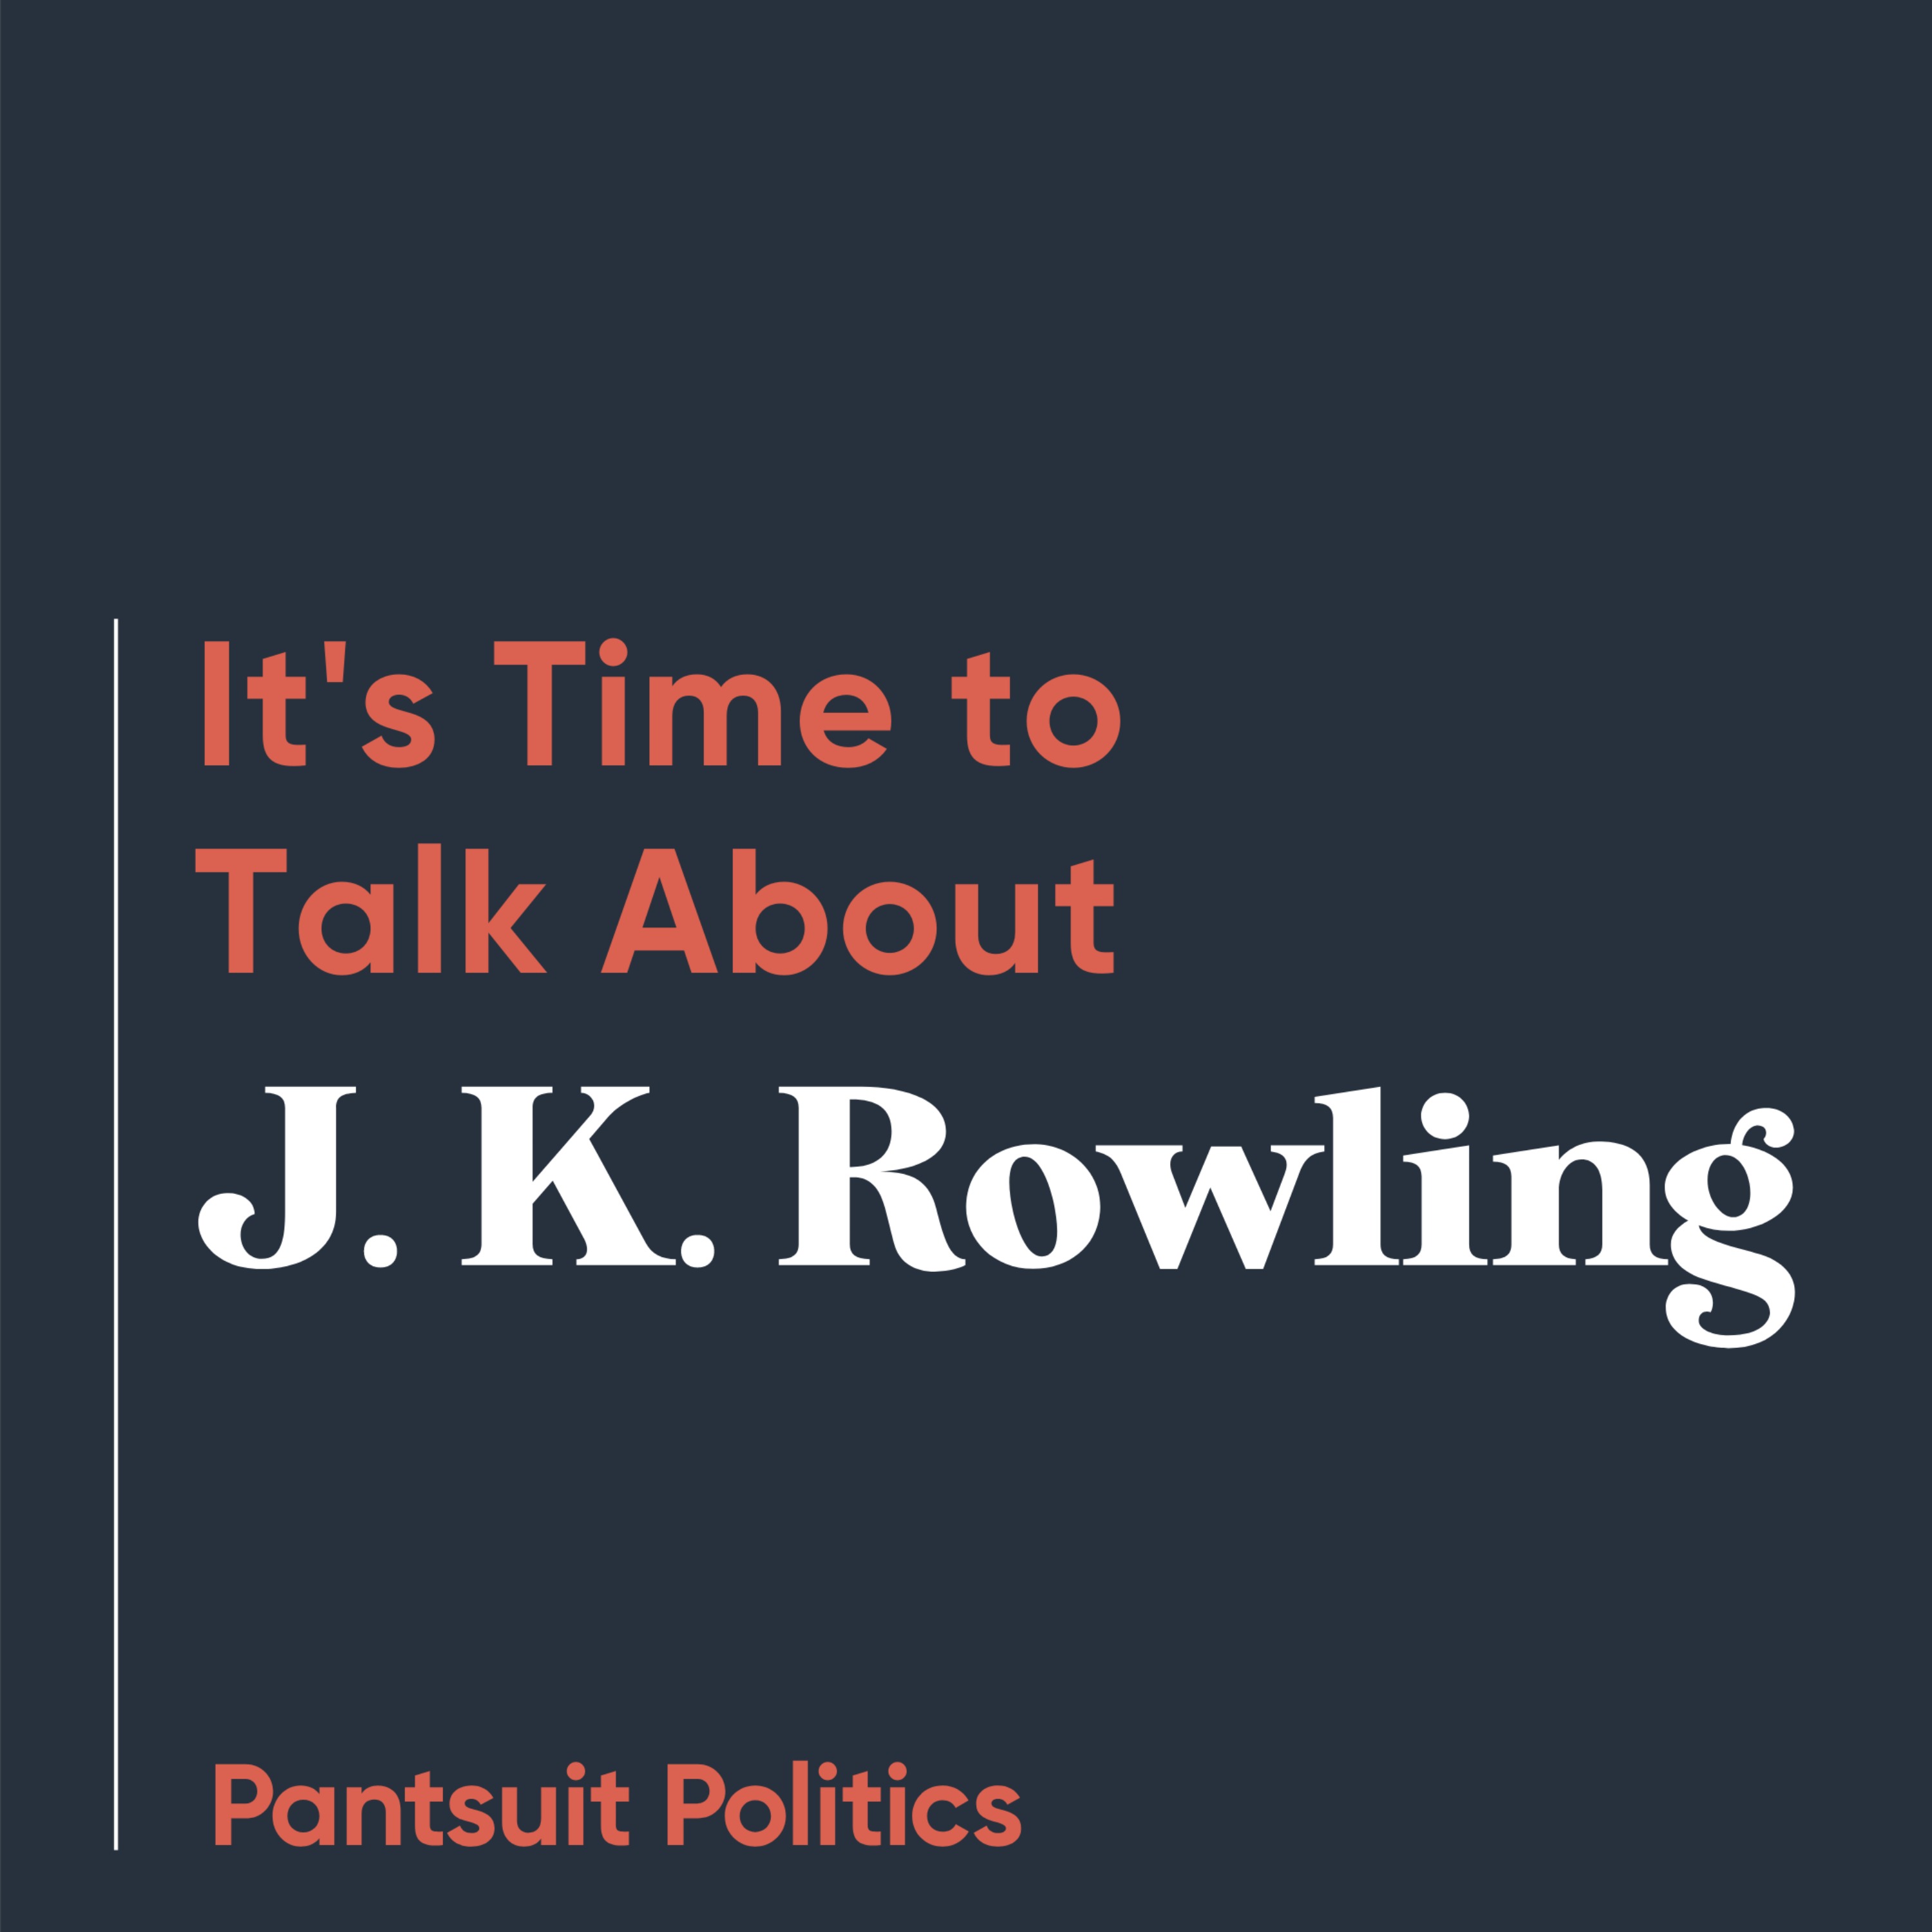 It's Time to Talk about J.K. Rowling